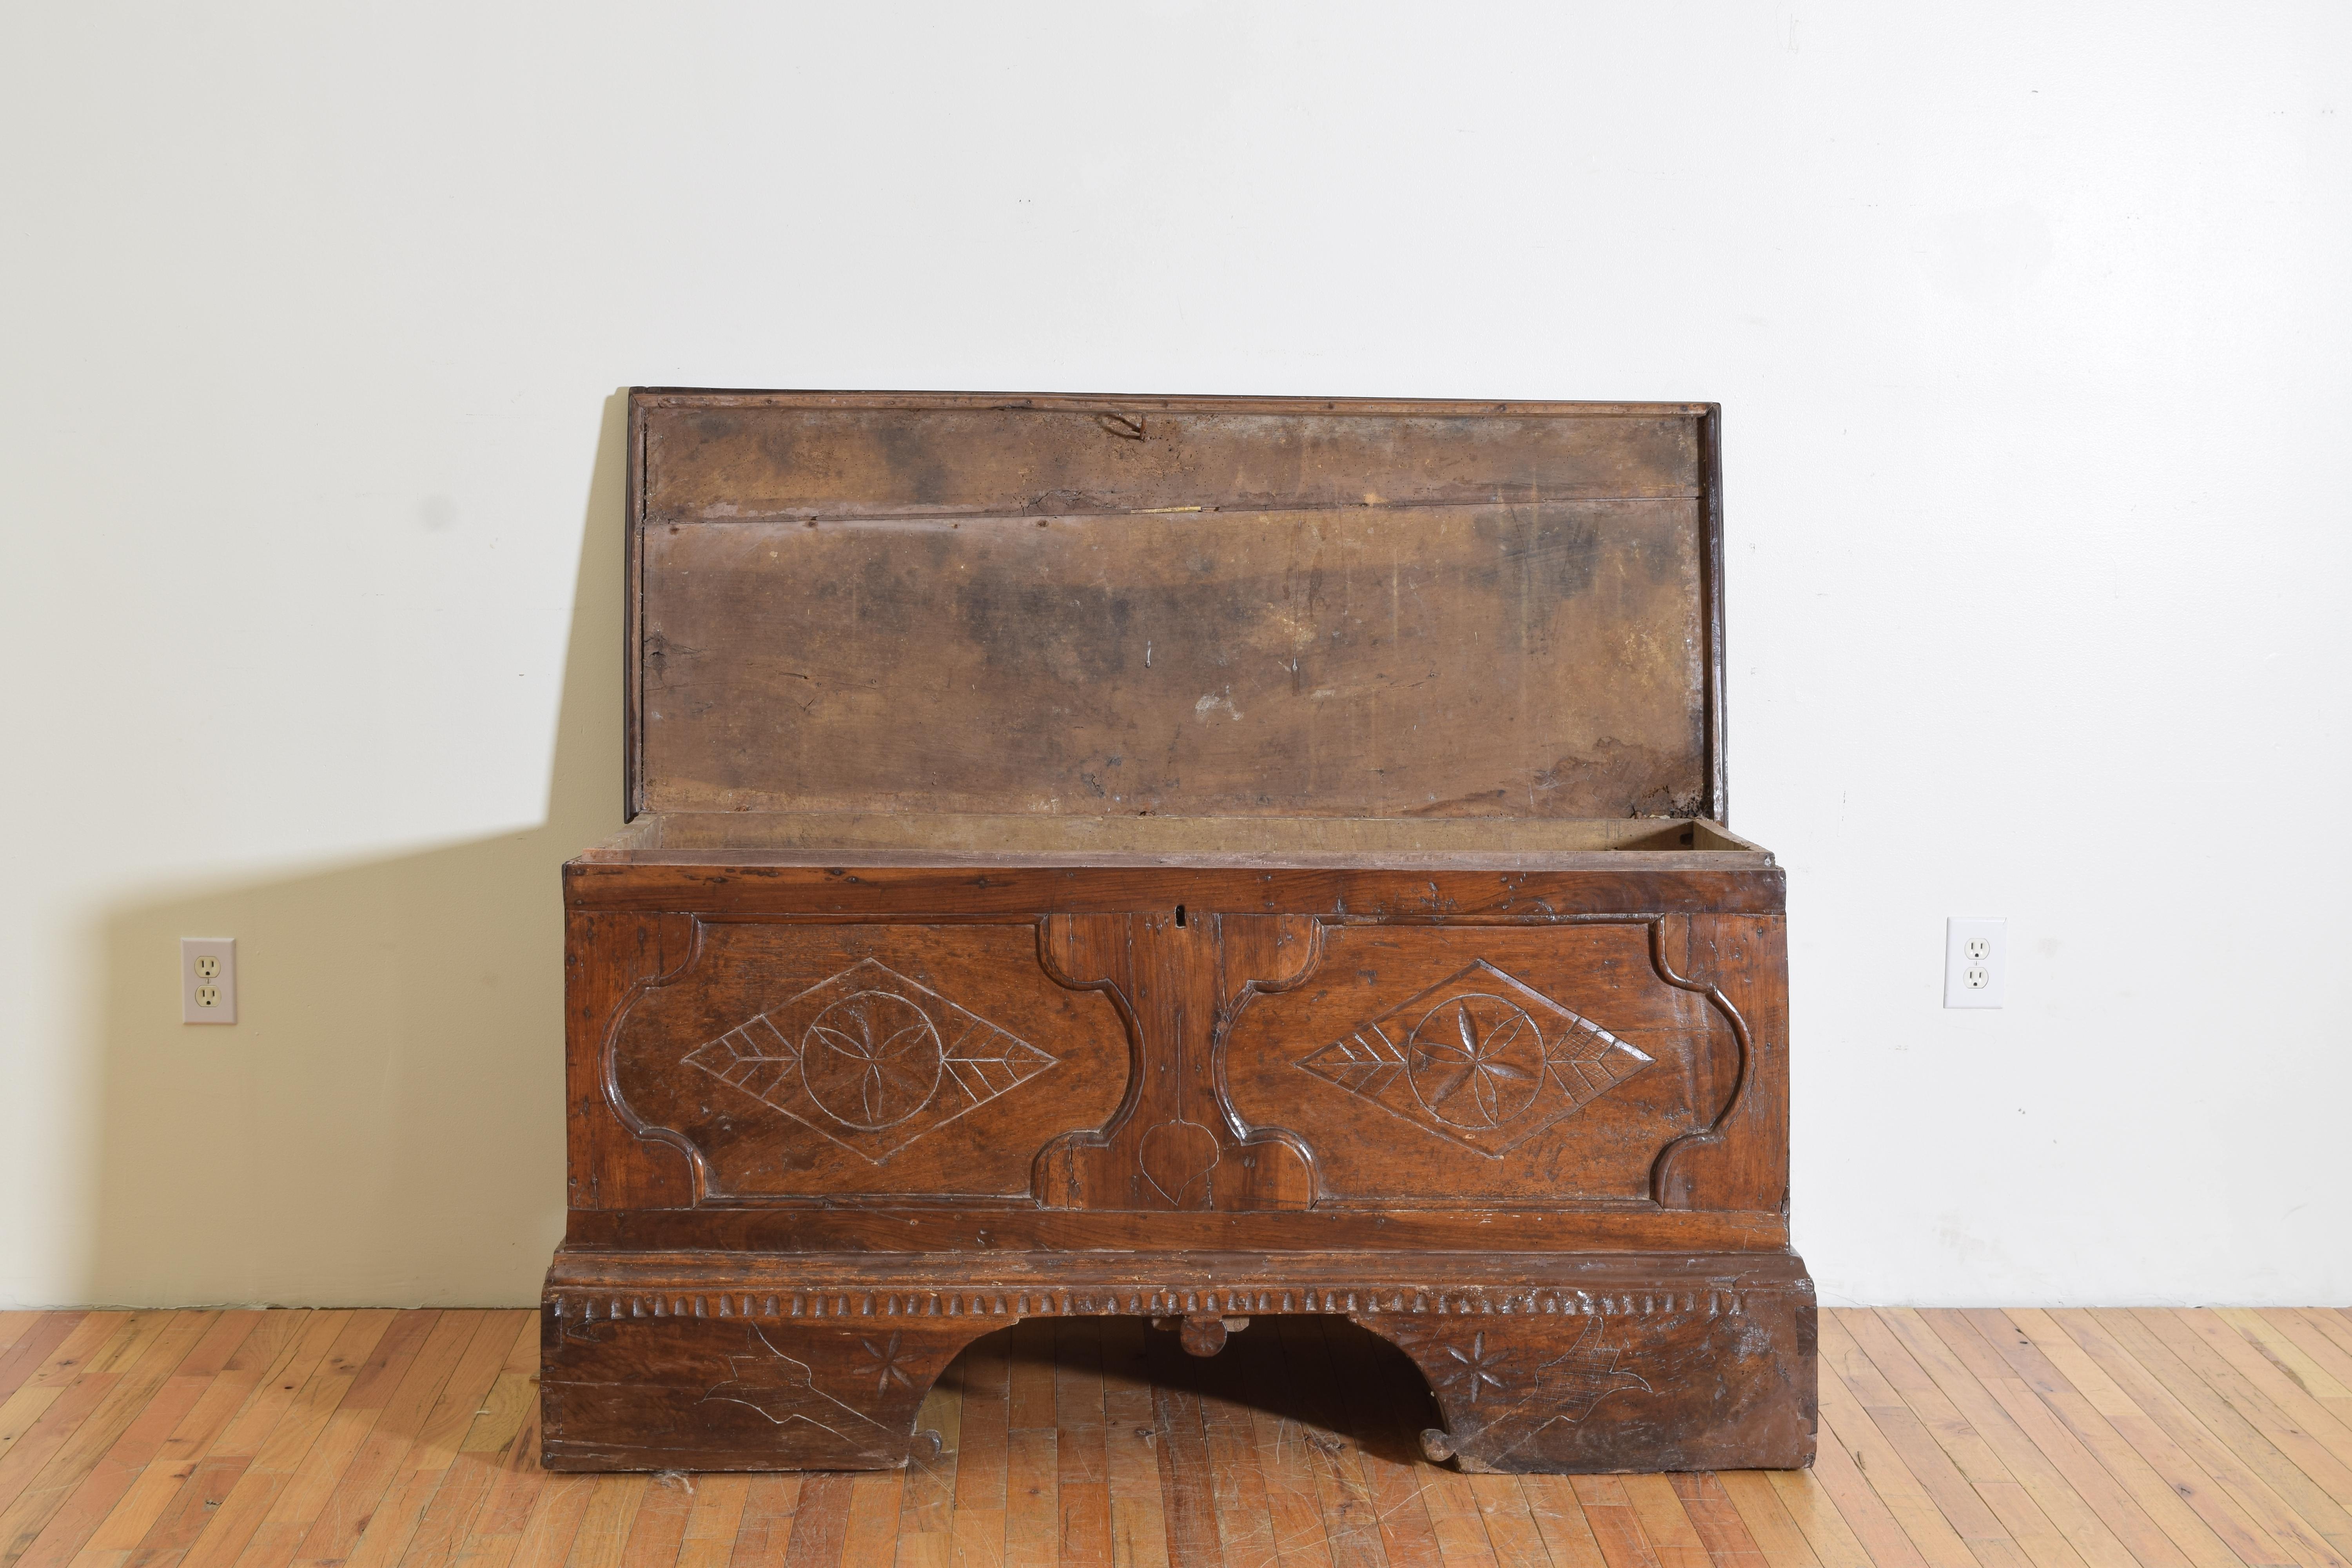 Italian / Southern Tyrolean Carved Walnut Paneled Cassapanca, mid 17th century In Good Condition For Sale In Atlanta, GA